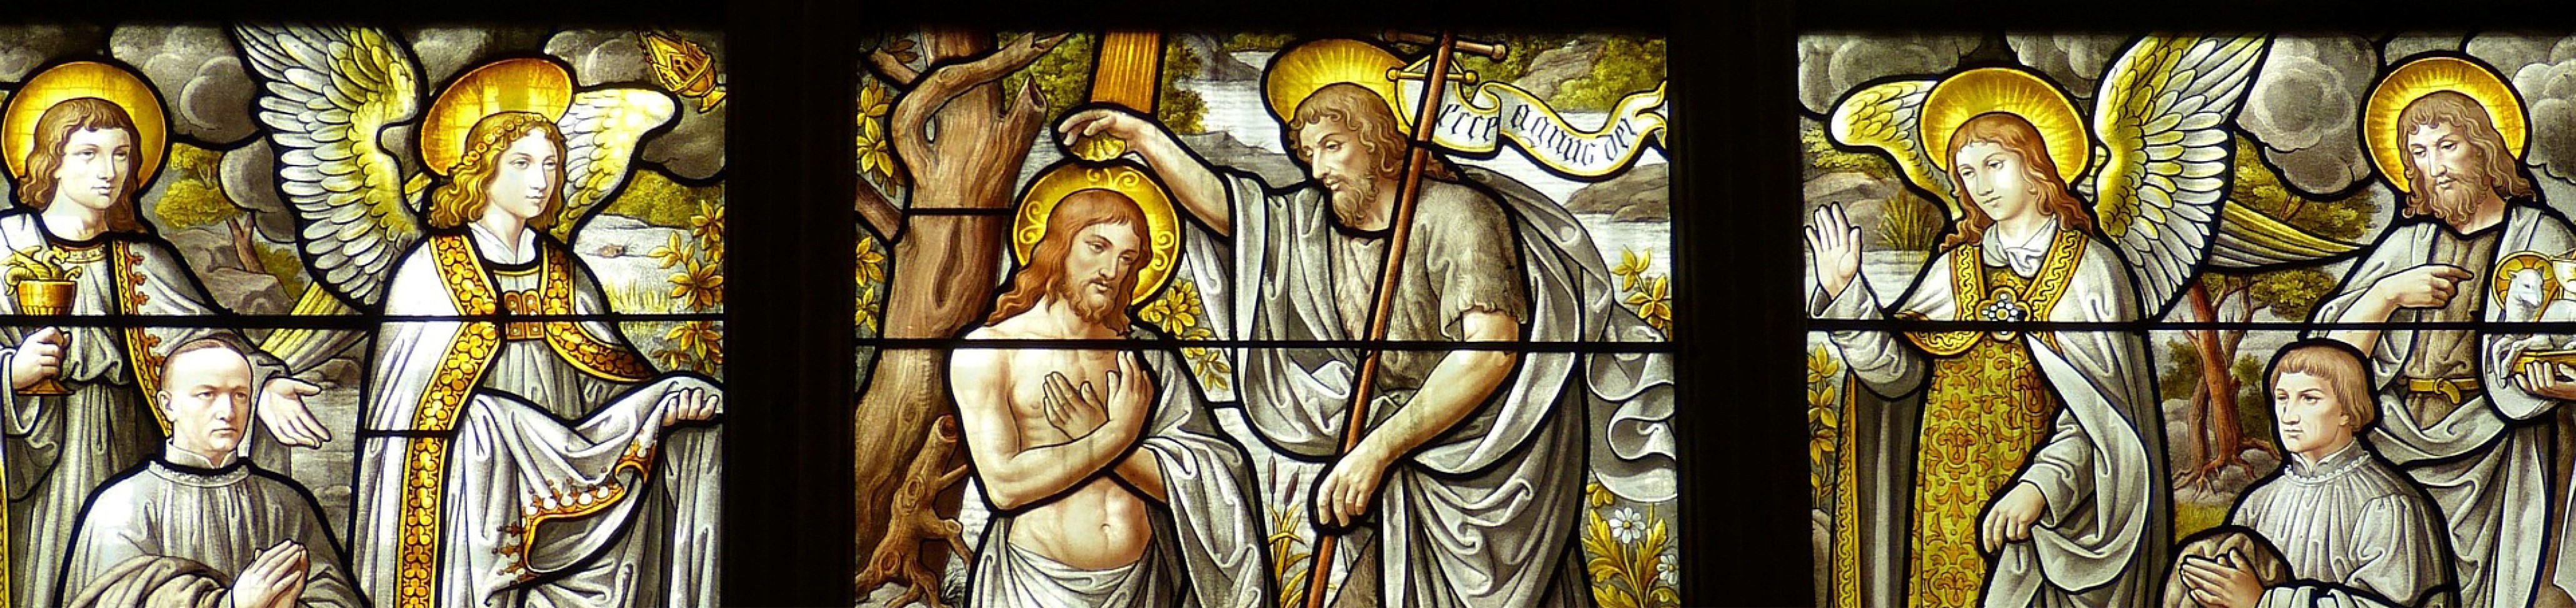 Stained glass window of the Baptism of Jesus